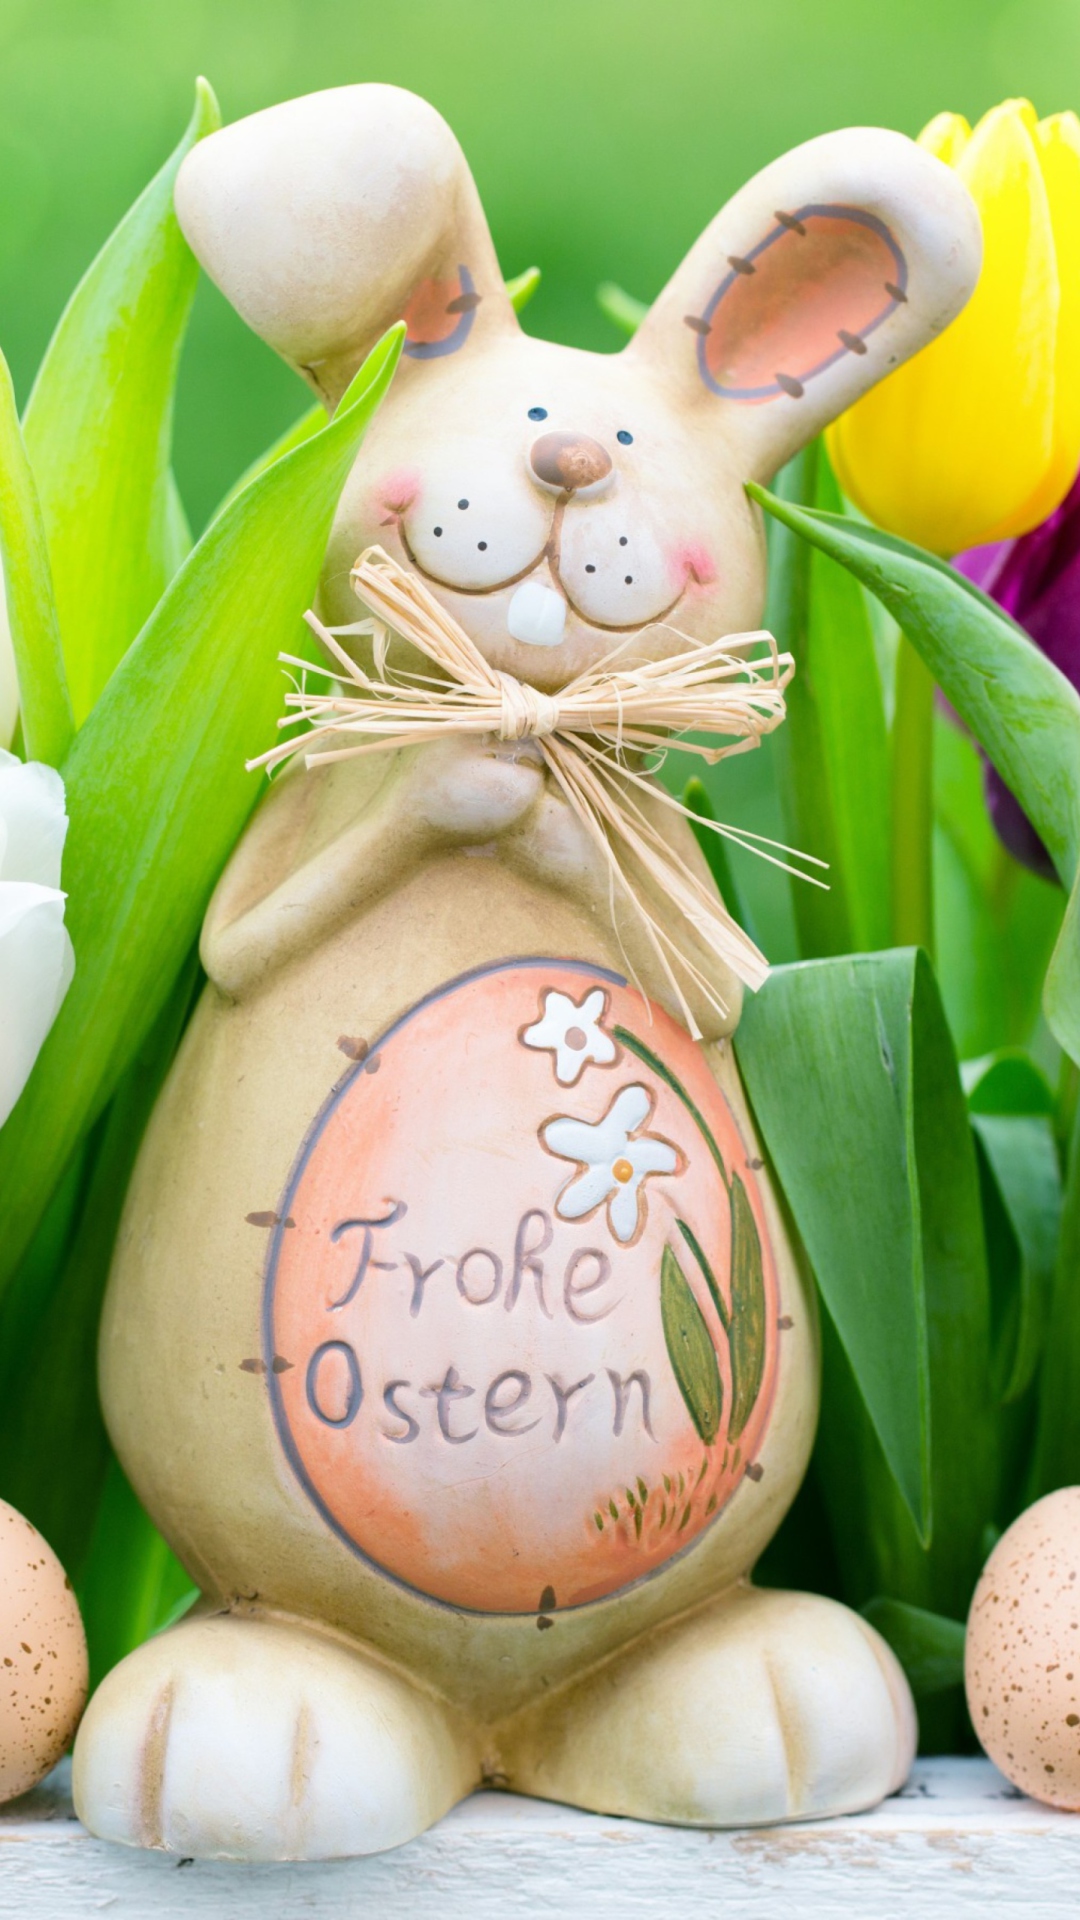 Frohe Ostern Wallpaper for 1080x1920.